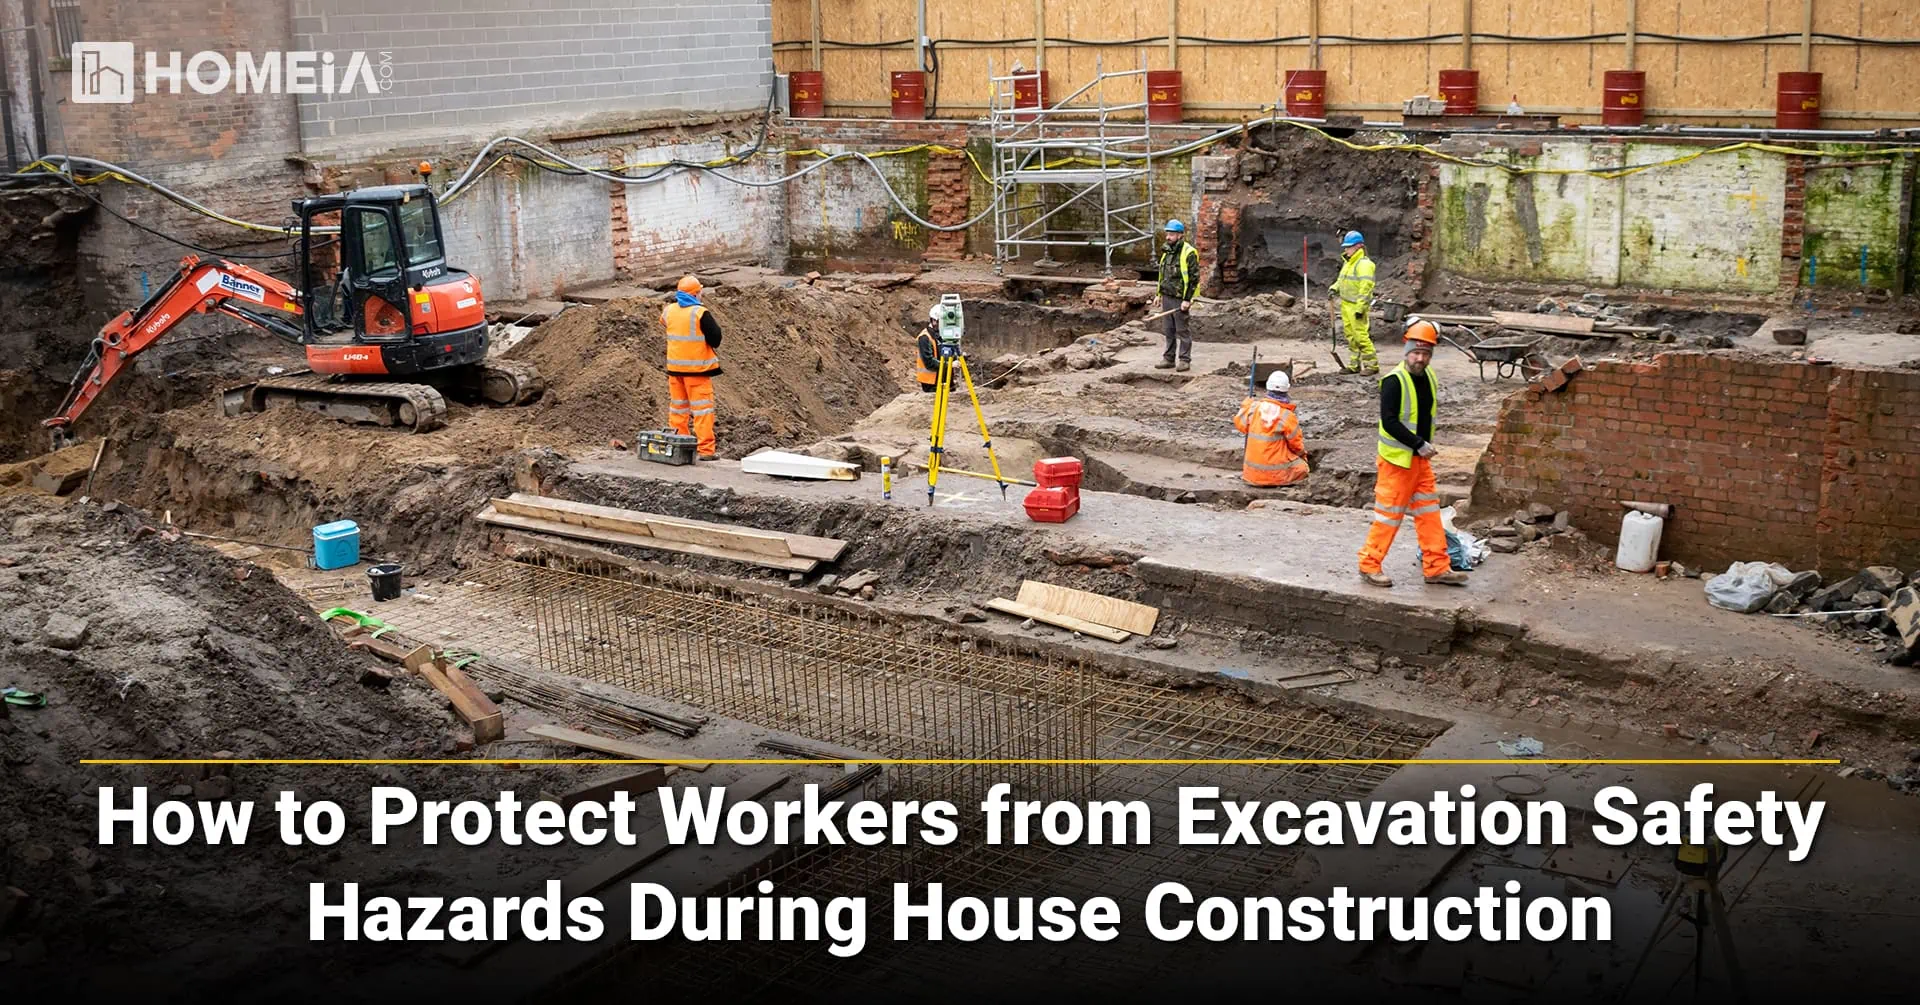 How to Protect Workers from Excavation Safety Hazards During House Construction